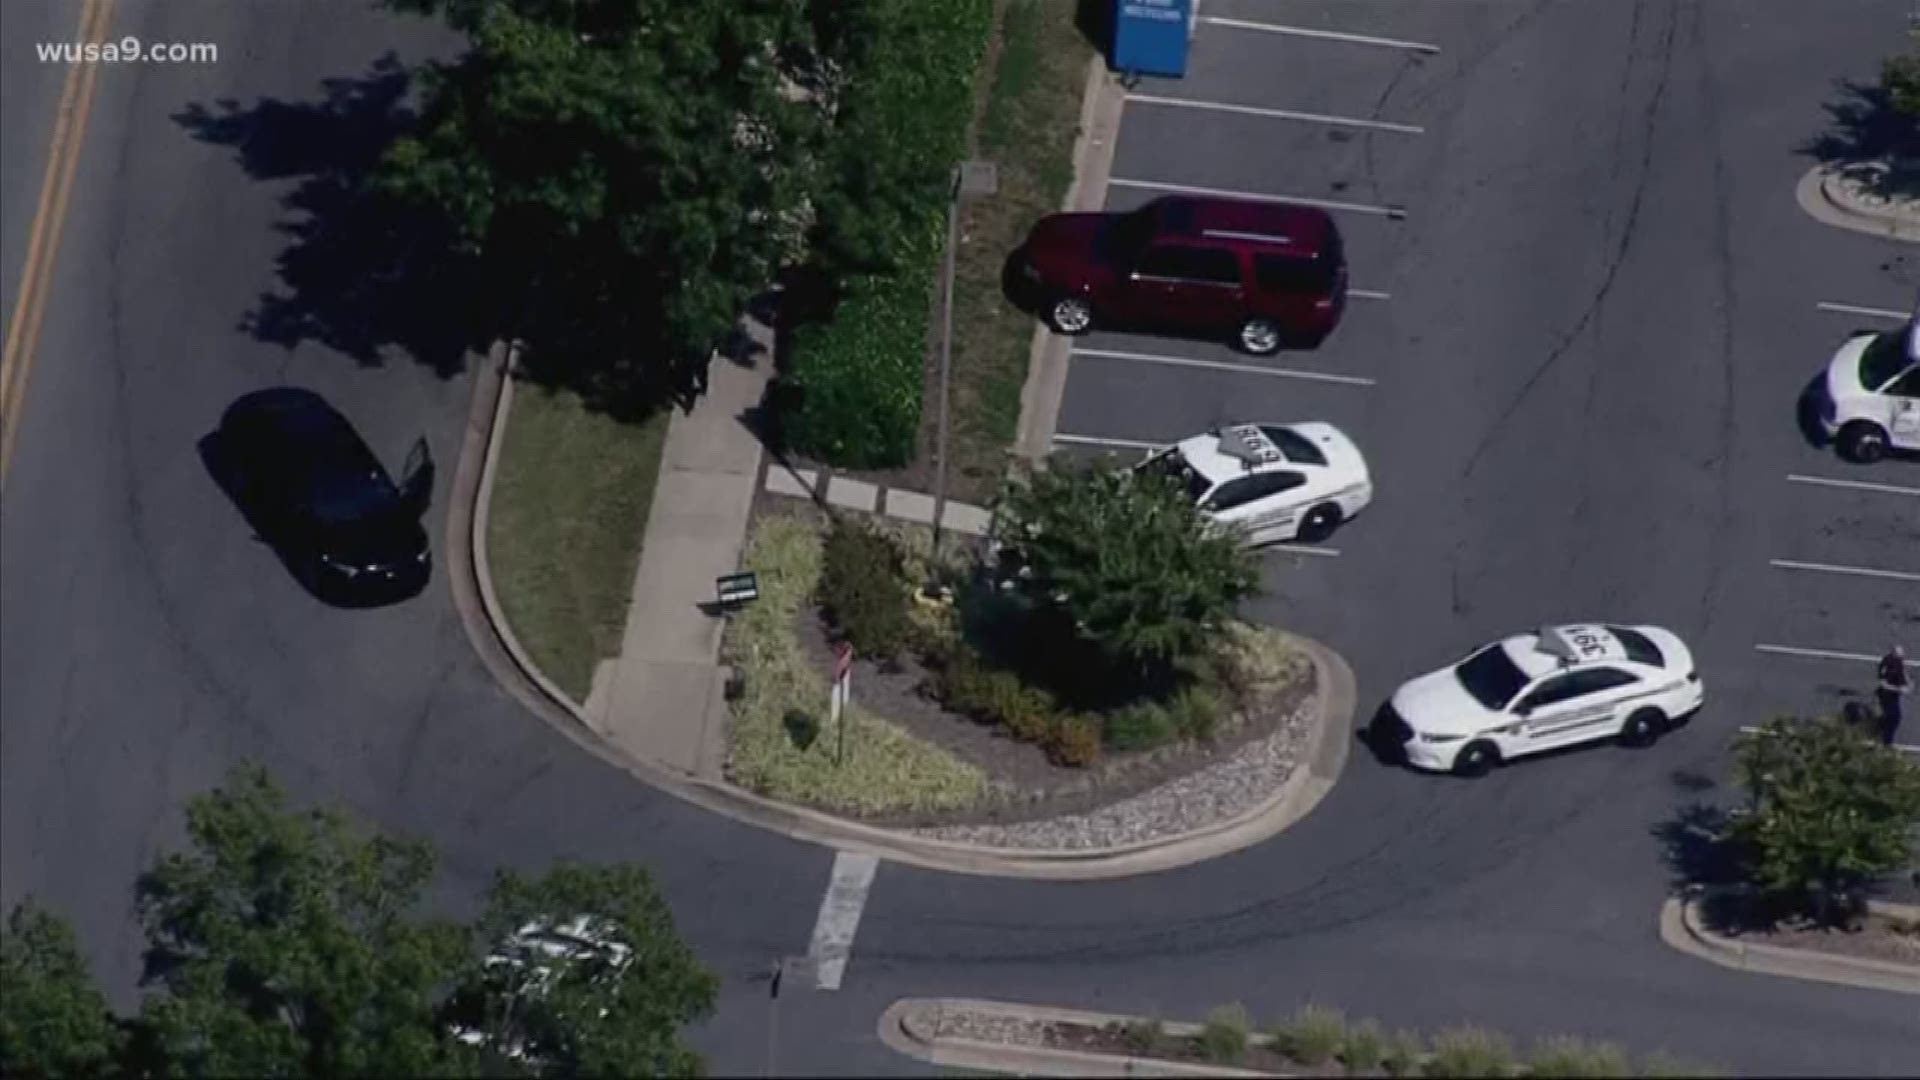 Police arrested one person after an apparent assault and stabbing in Gaithersburg on Thursday afternoon. Four people were hurt, including one person with stab wounds.